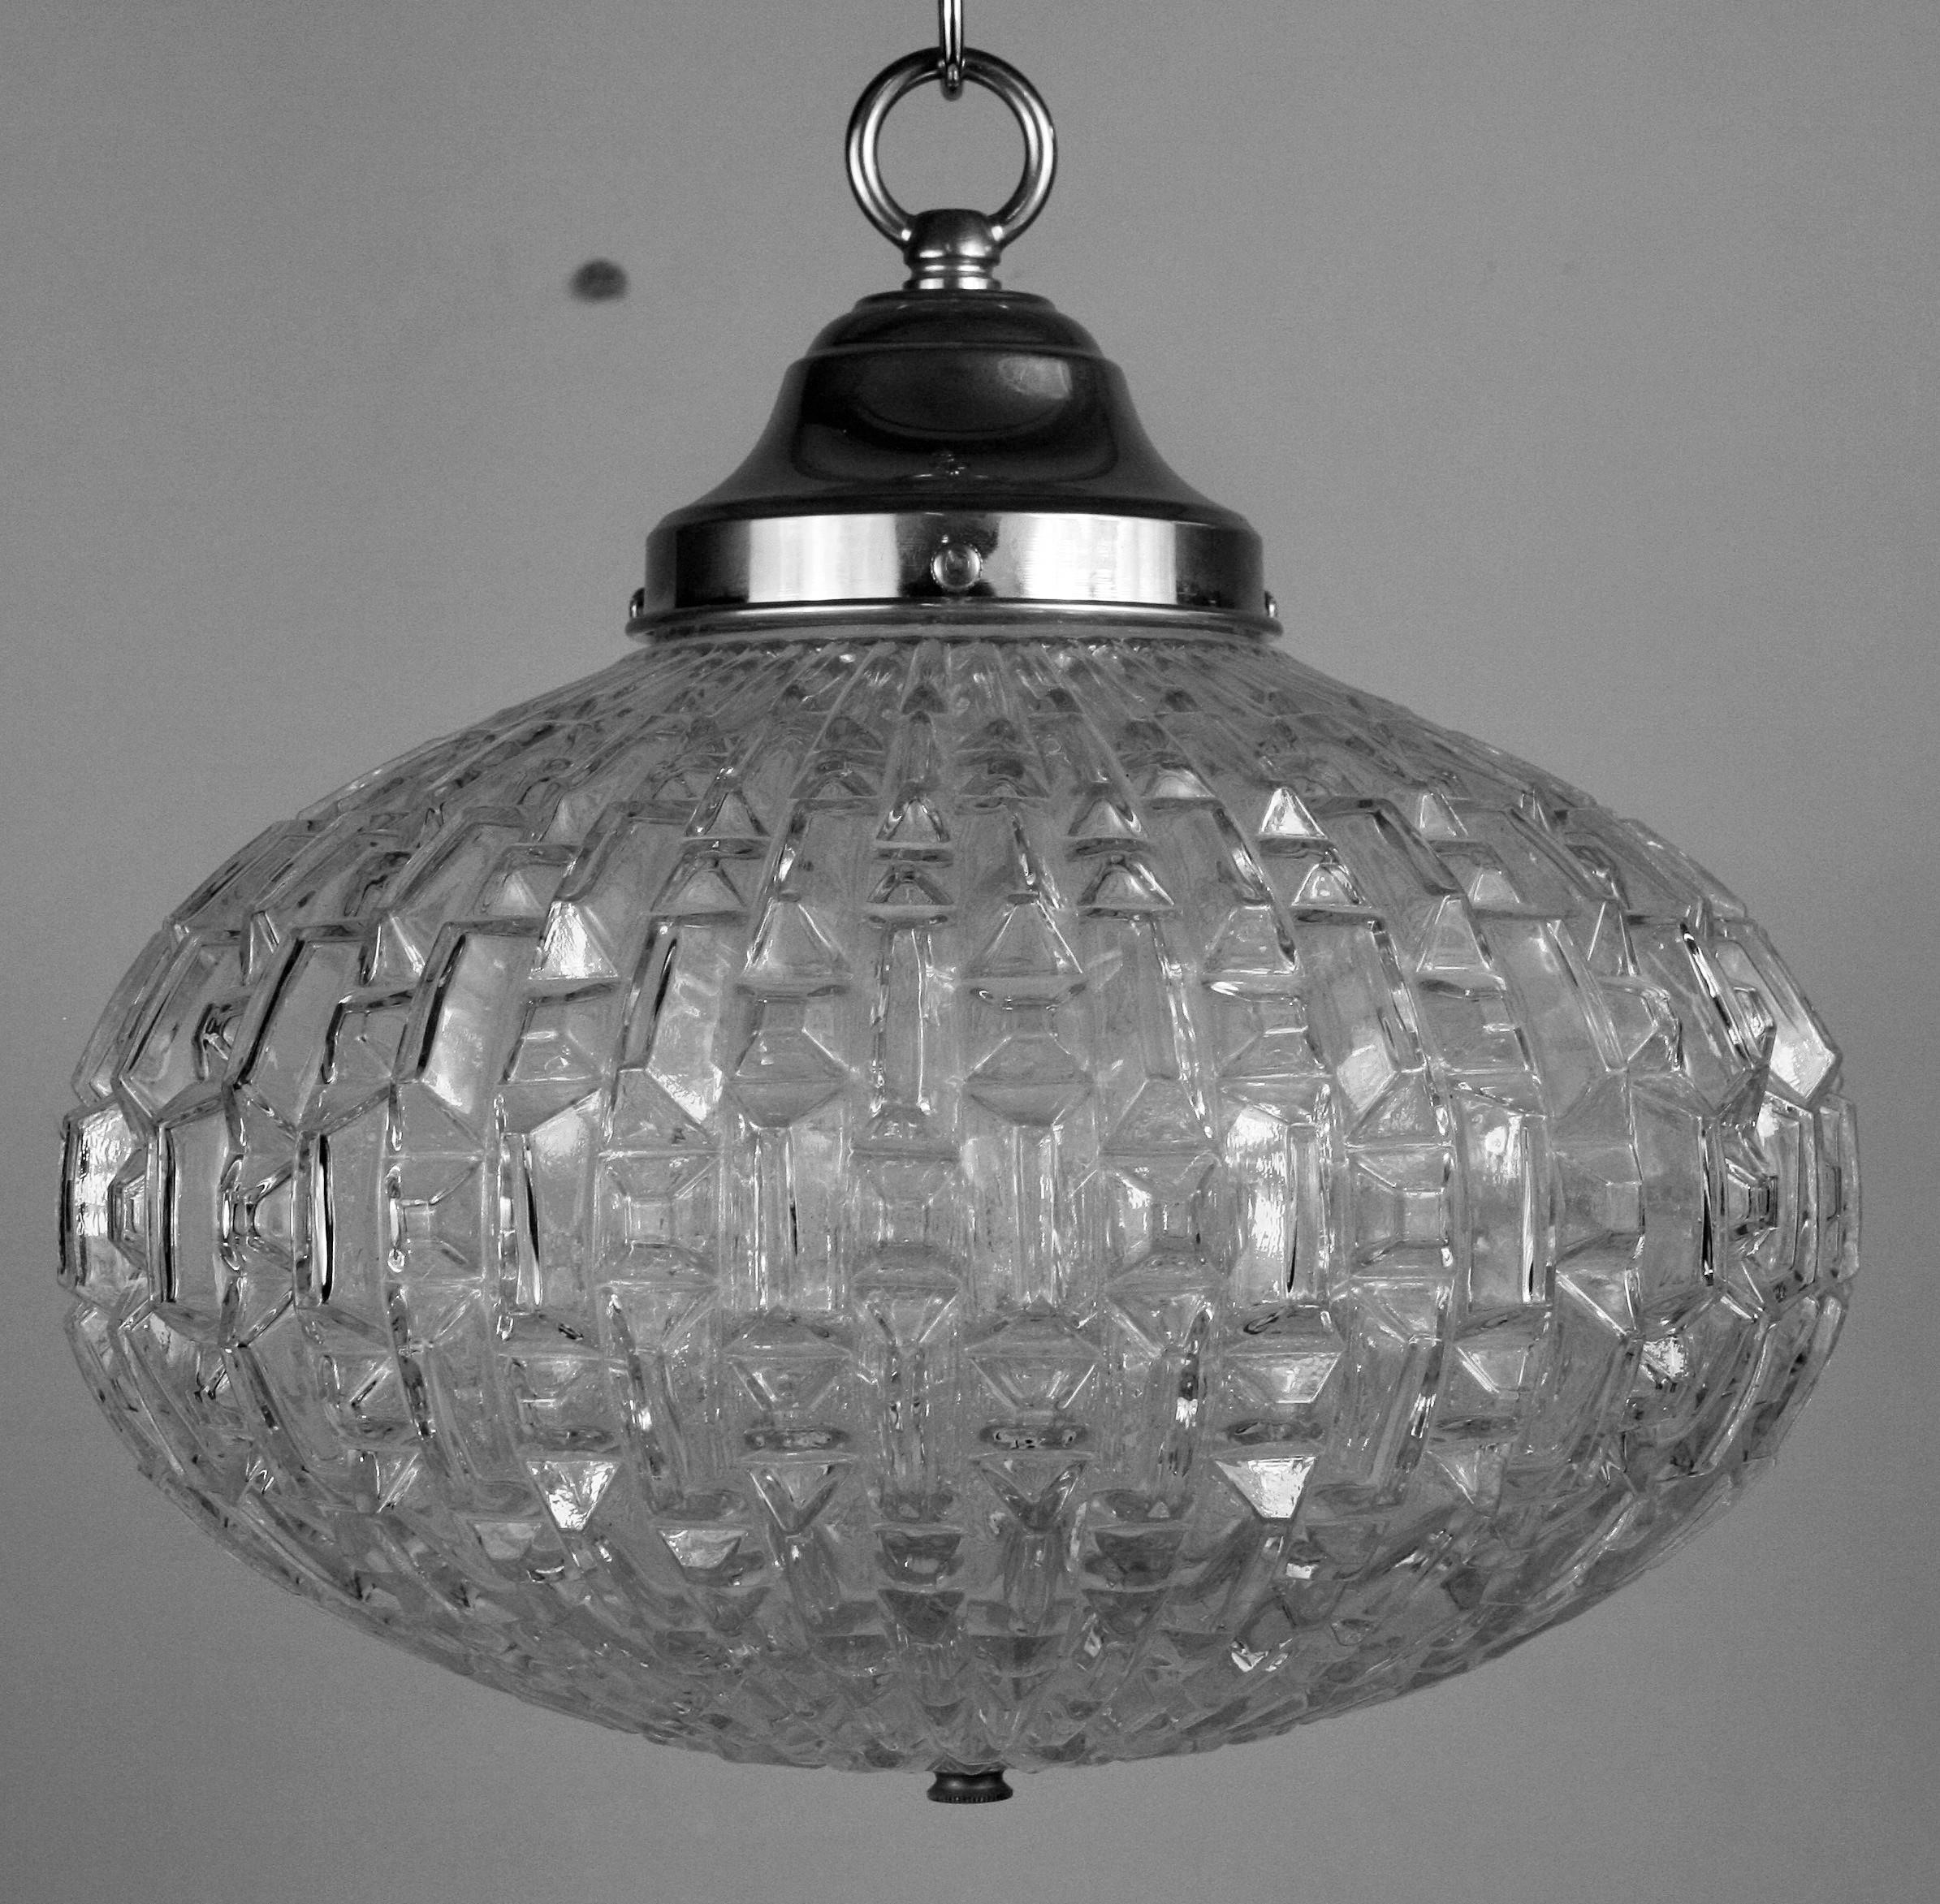 1614 Italian  midcentury ovoid shaped geometric glass pendant
Size glass: 8 H x 12 W
Two available
Priced individually
Supplied with 2feet of chain and canopy.